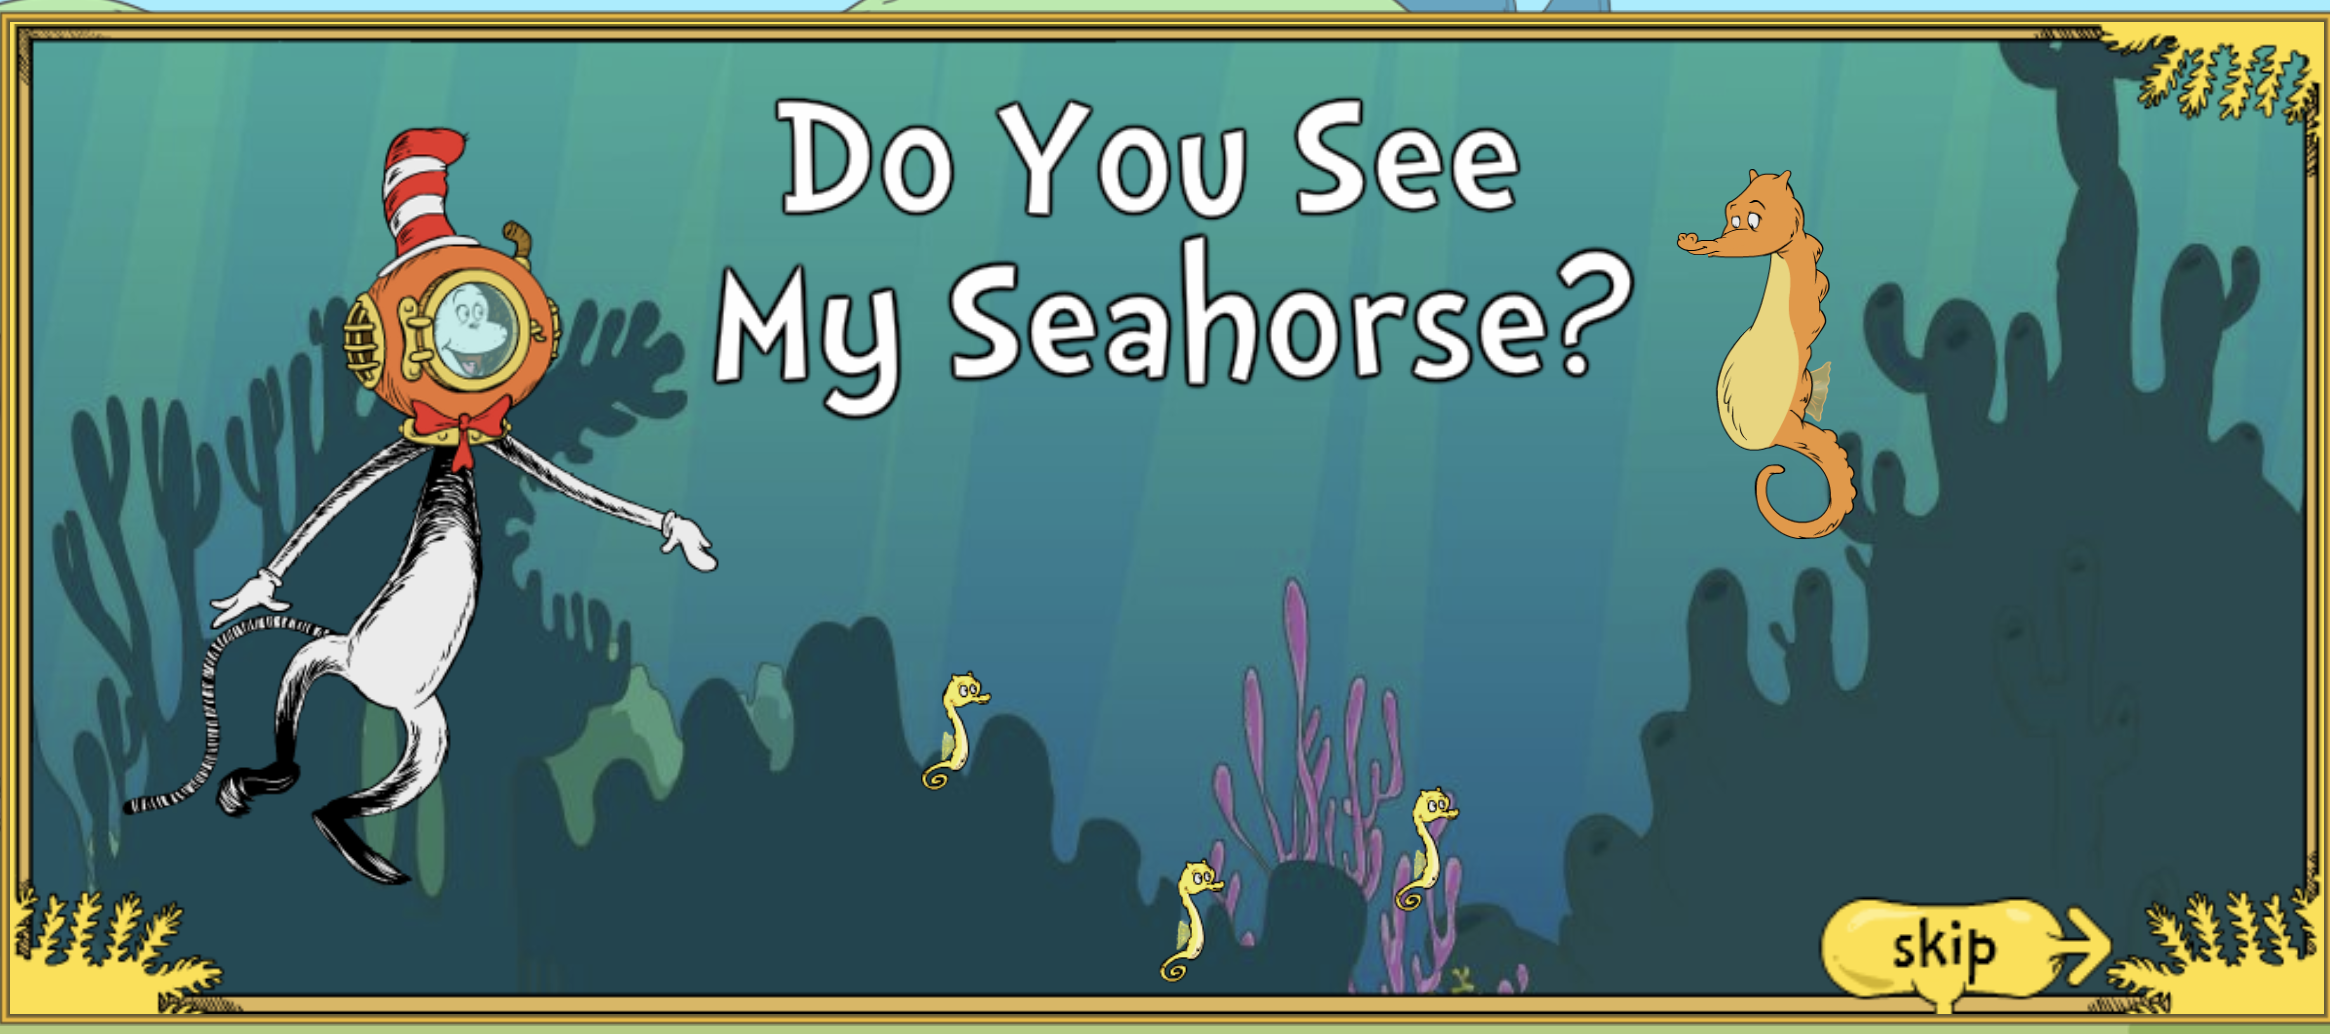 Seahorse counting game